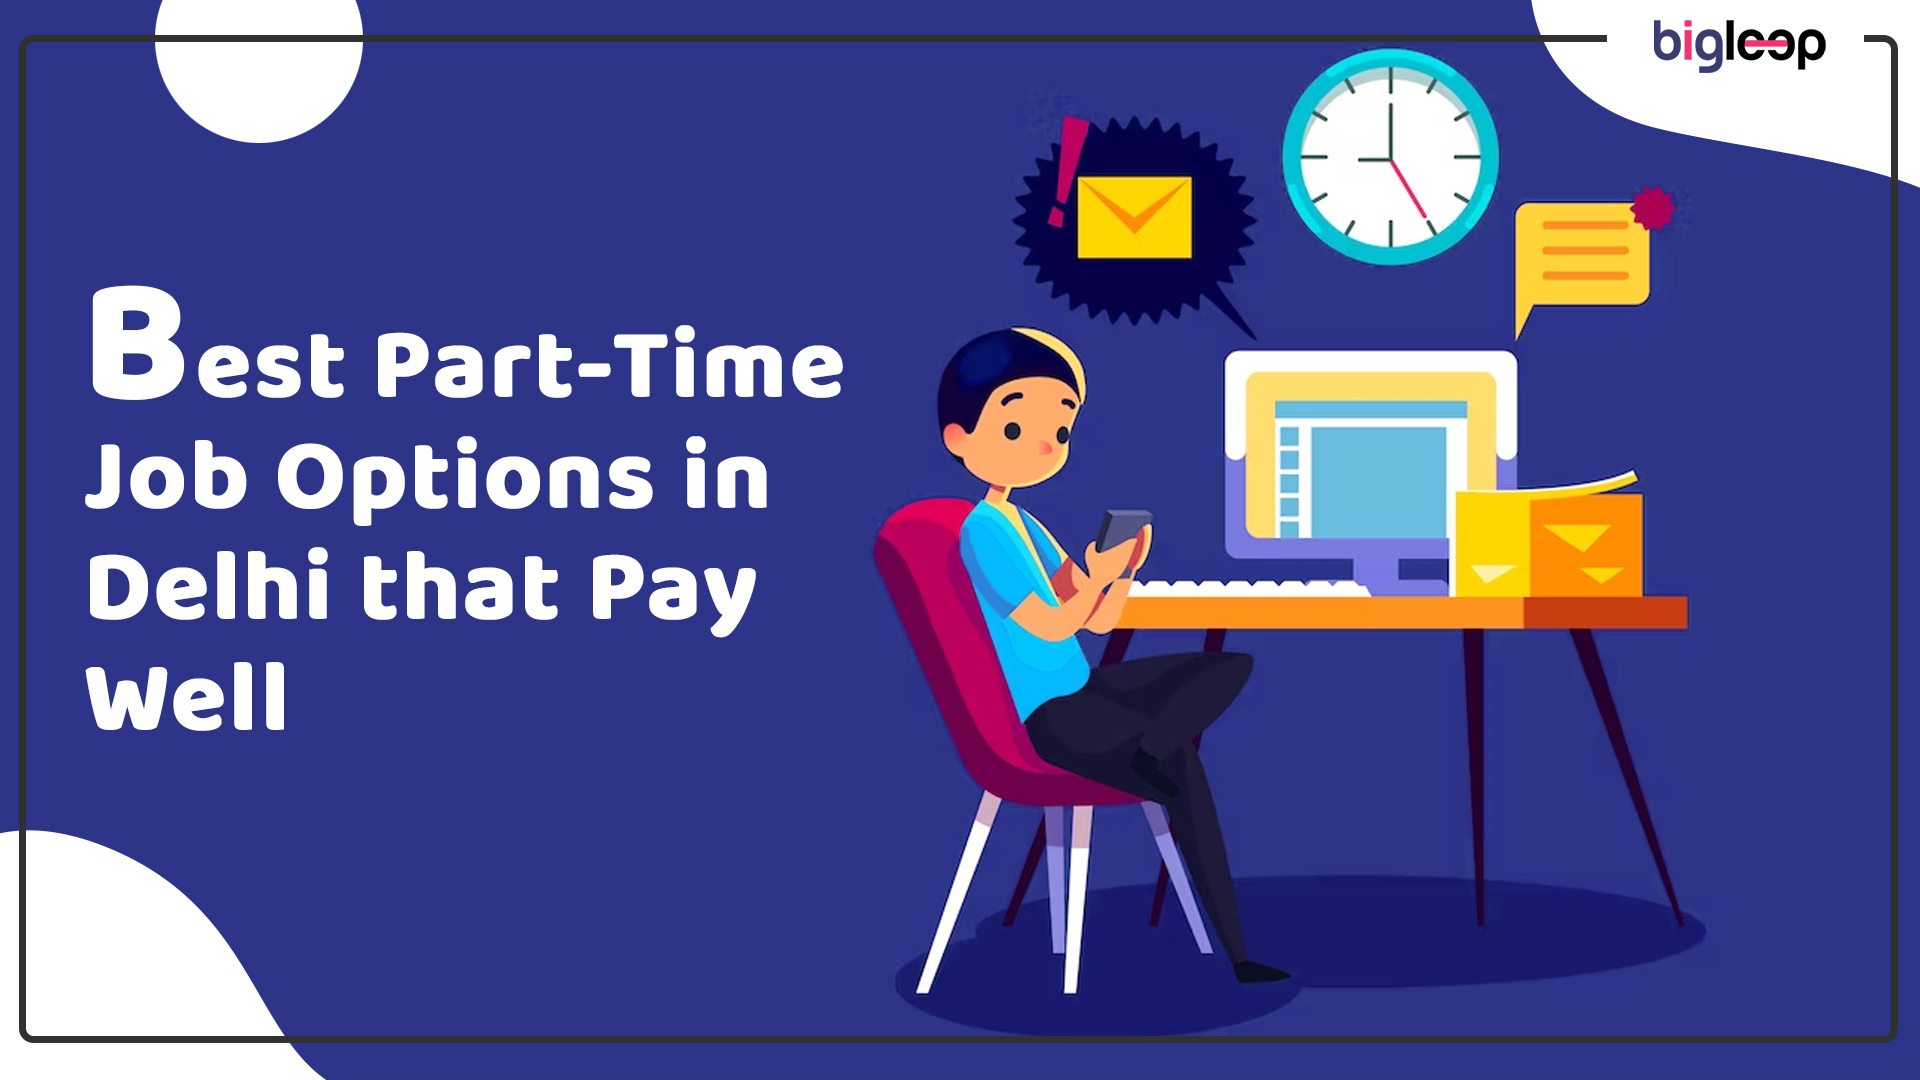 Best Part-Time Job Options in Delhi that Pay Well